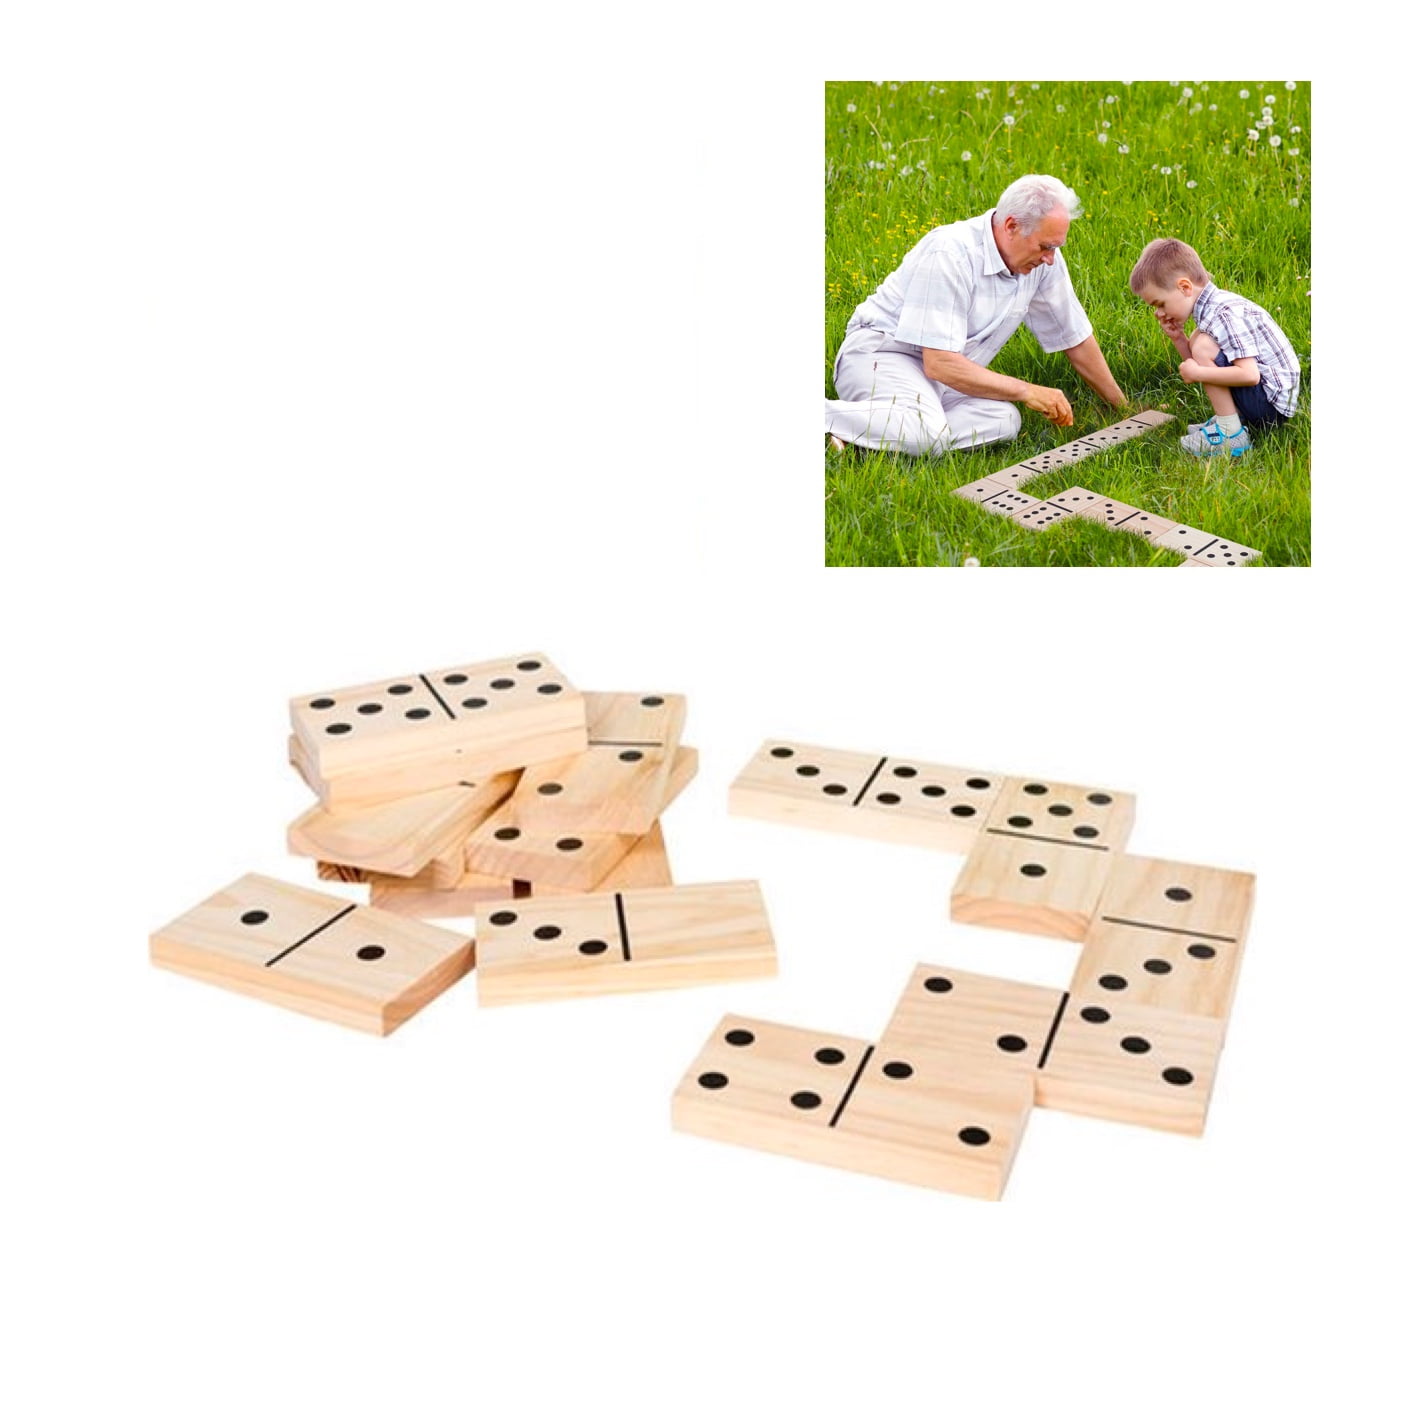 Big Domino game in a bag